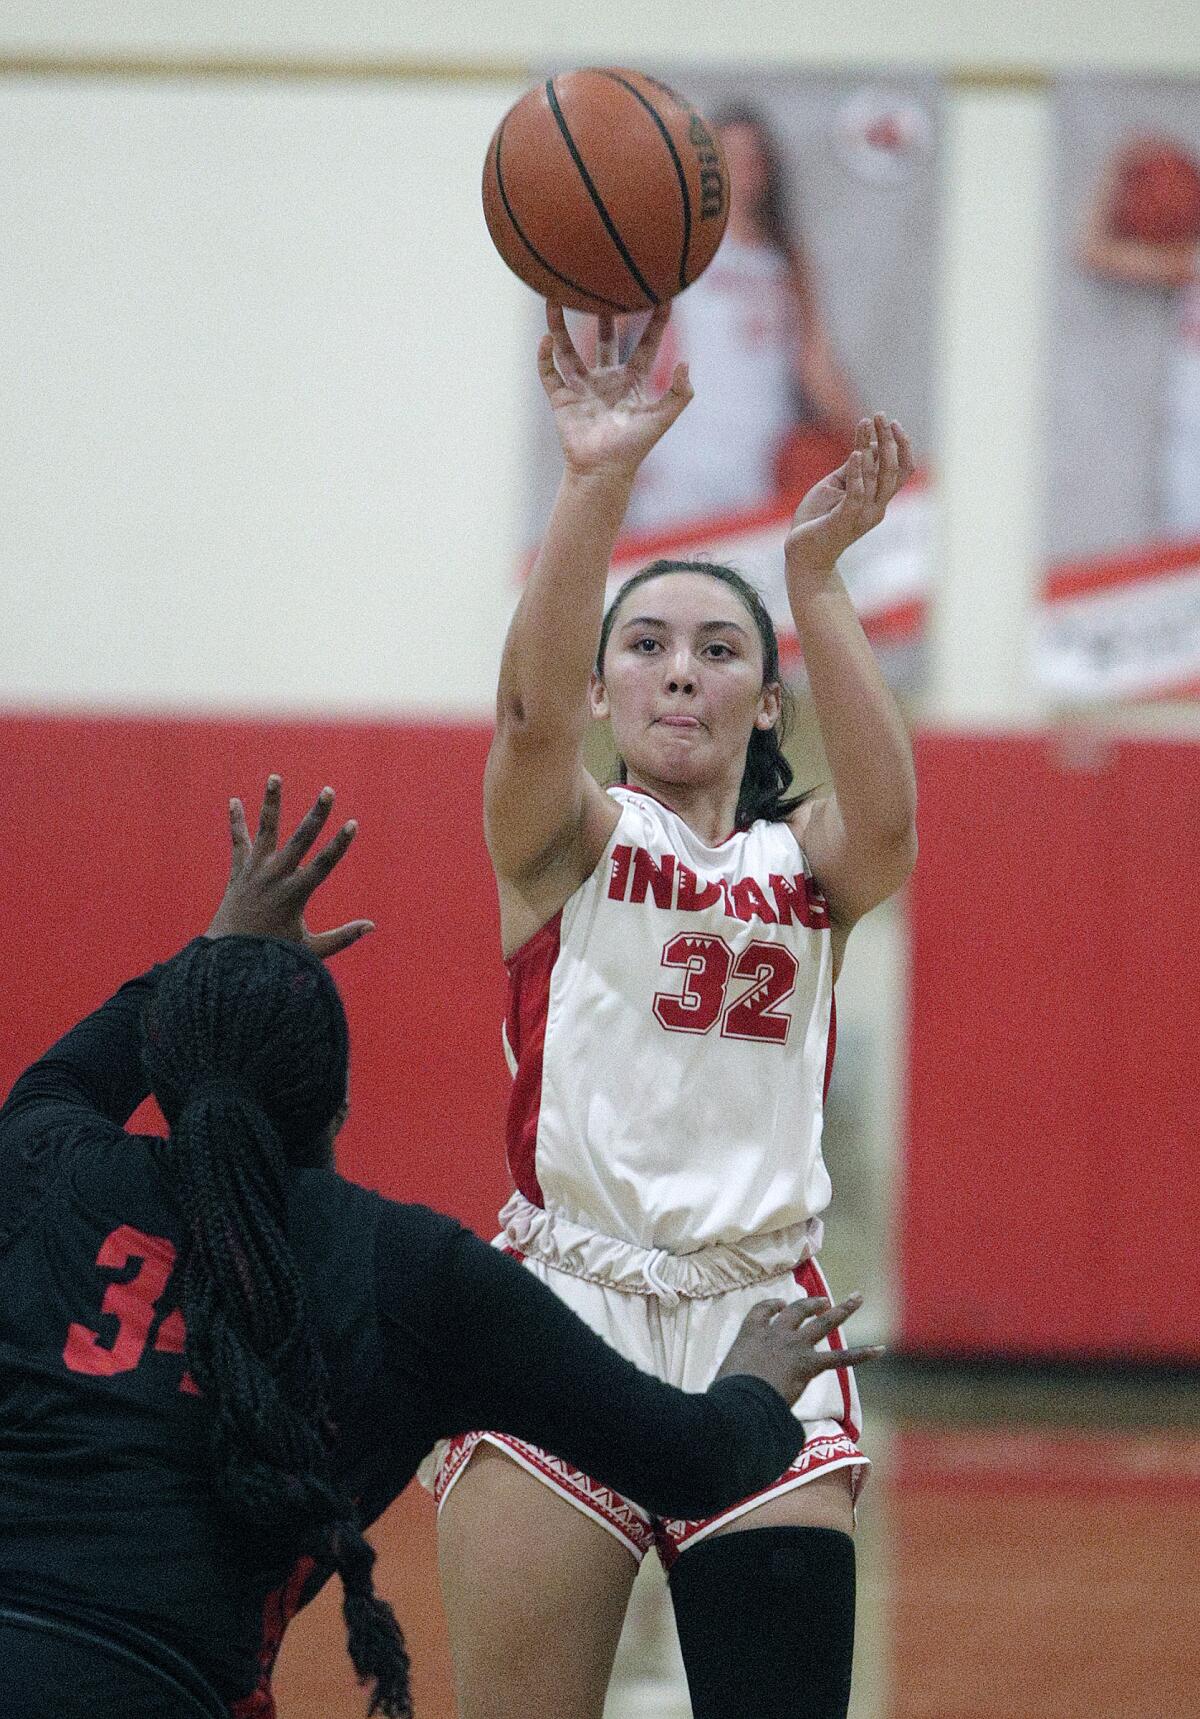 Burroughs High junior girls' basketball player Faith Boulanger was named Pacific League co-Player of the Year, averaging 14.5 points. 8.2 rebounds and 2.1 steals per game.